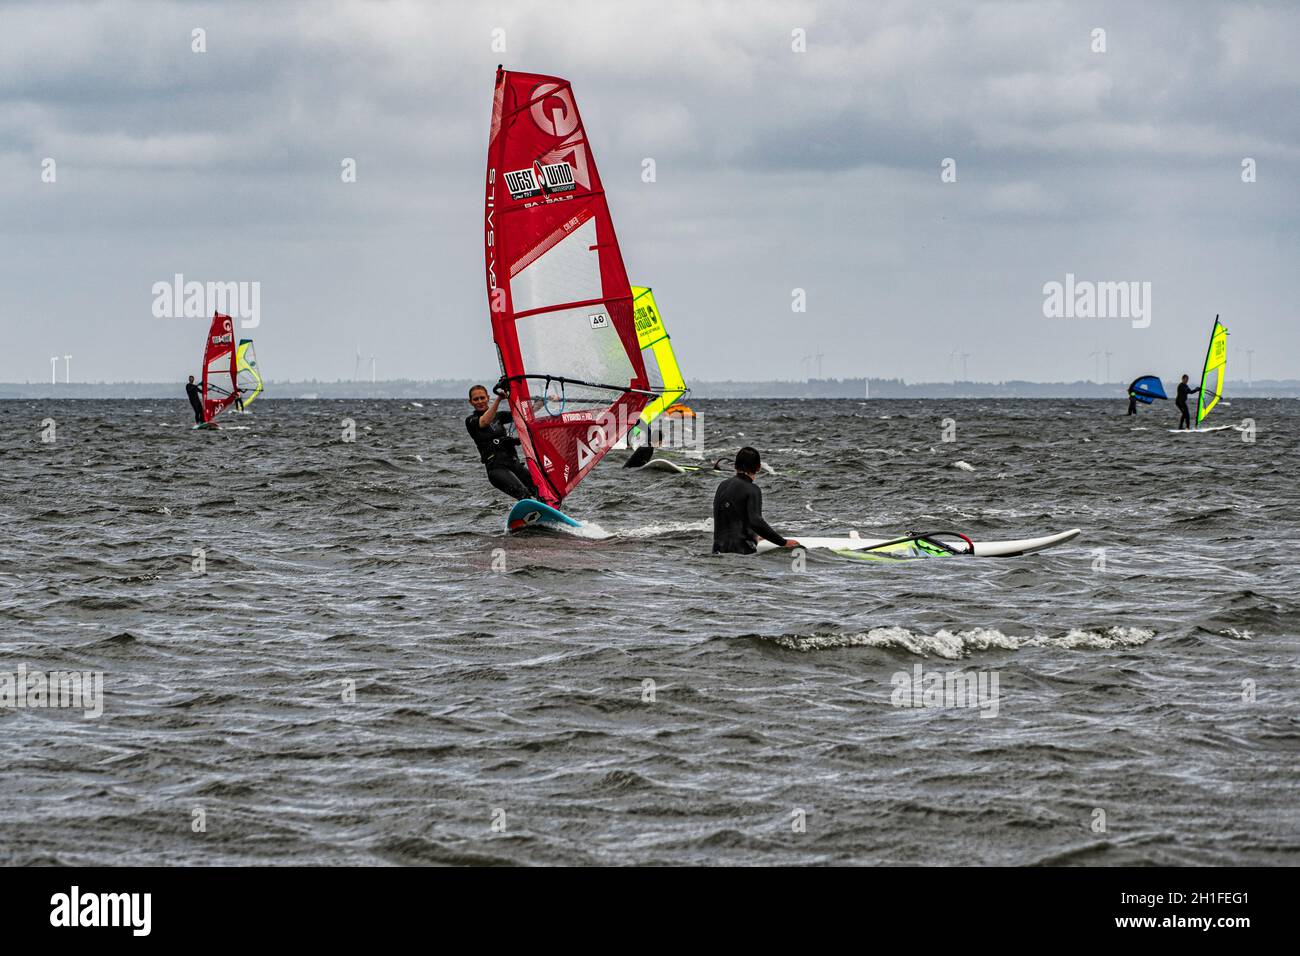 Windsurfing school in the waves of the North Sea. Denmark, Europe Stock Photo